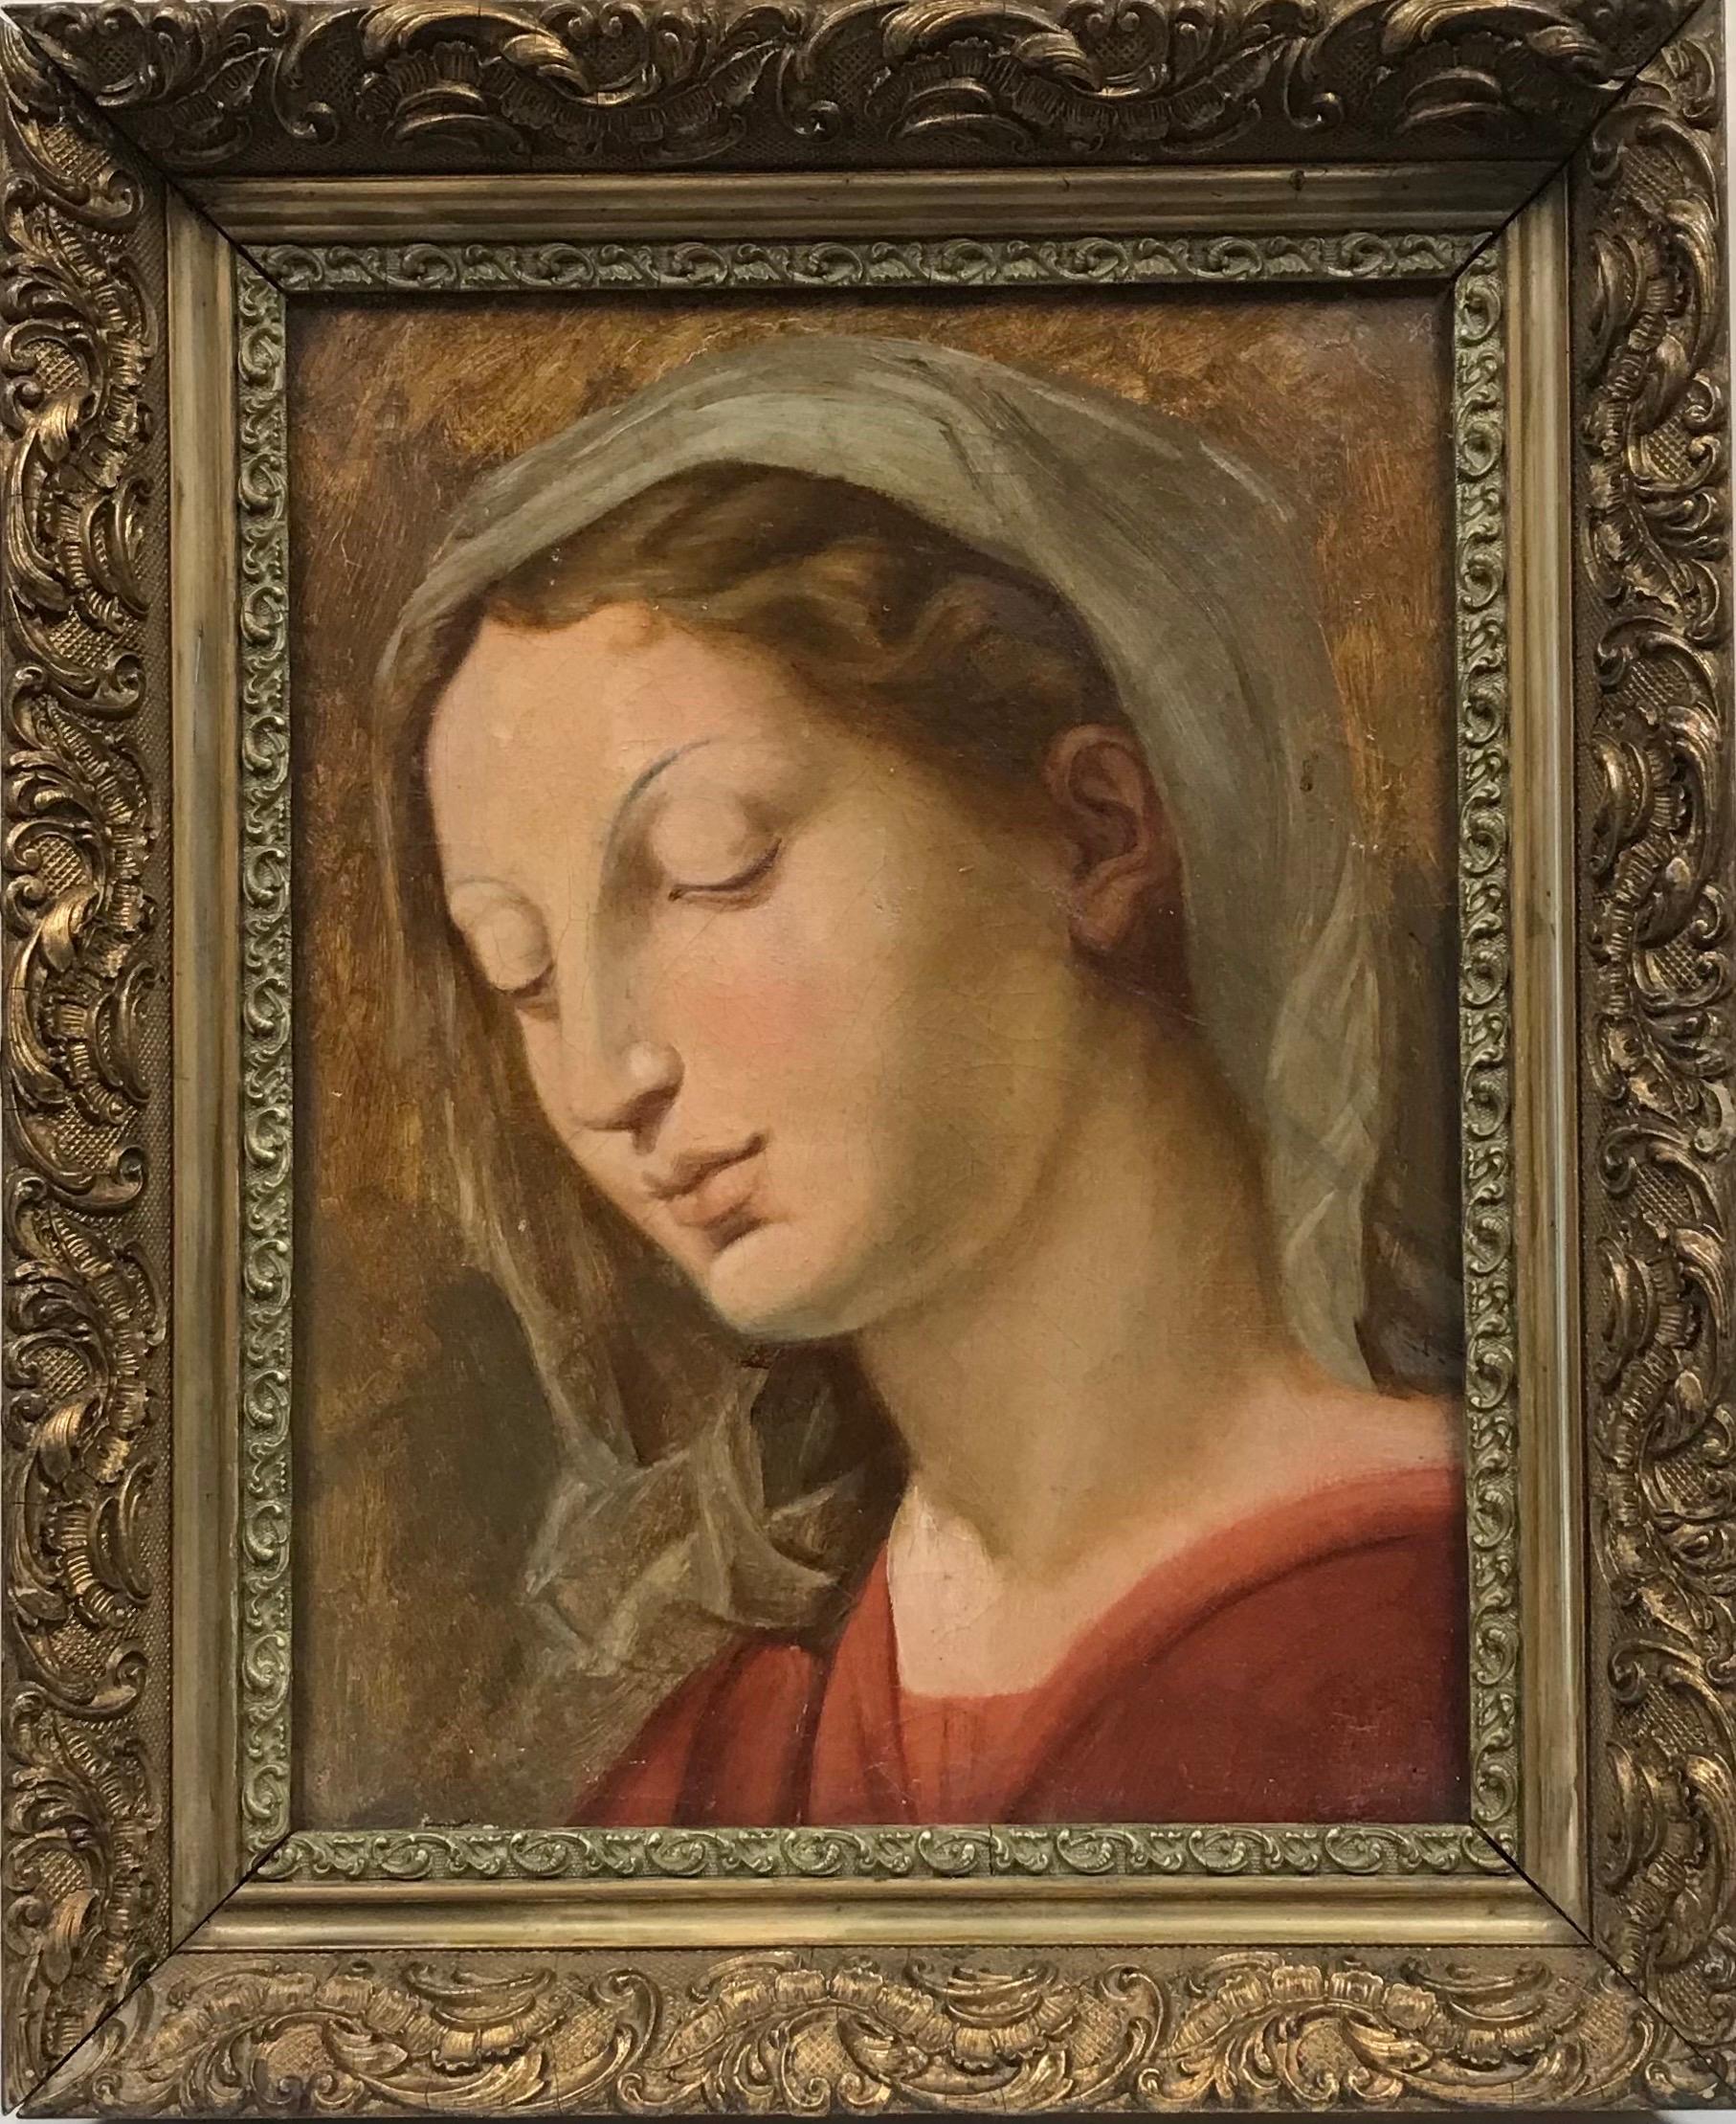 Figurative Painting 19th Century Italian School - Beauty Antique Original Oil Painting The Madonna in Contemplation, gilt frame